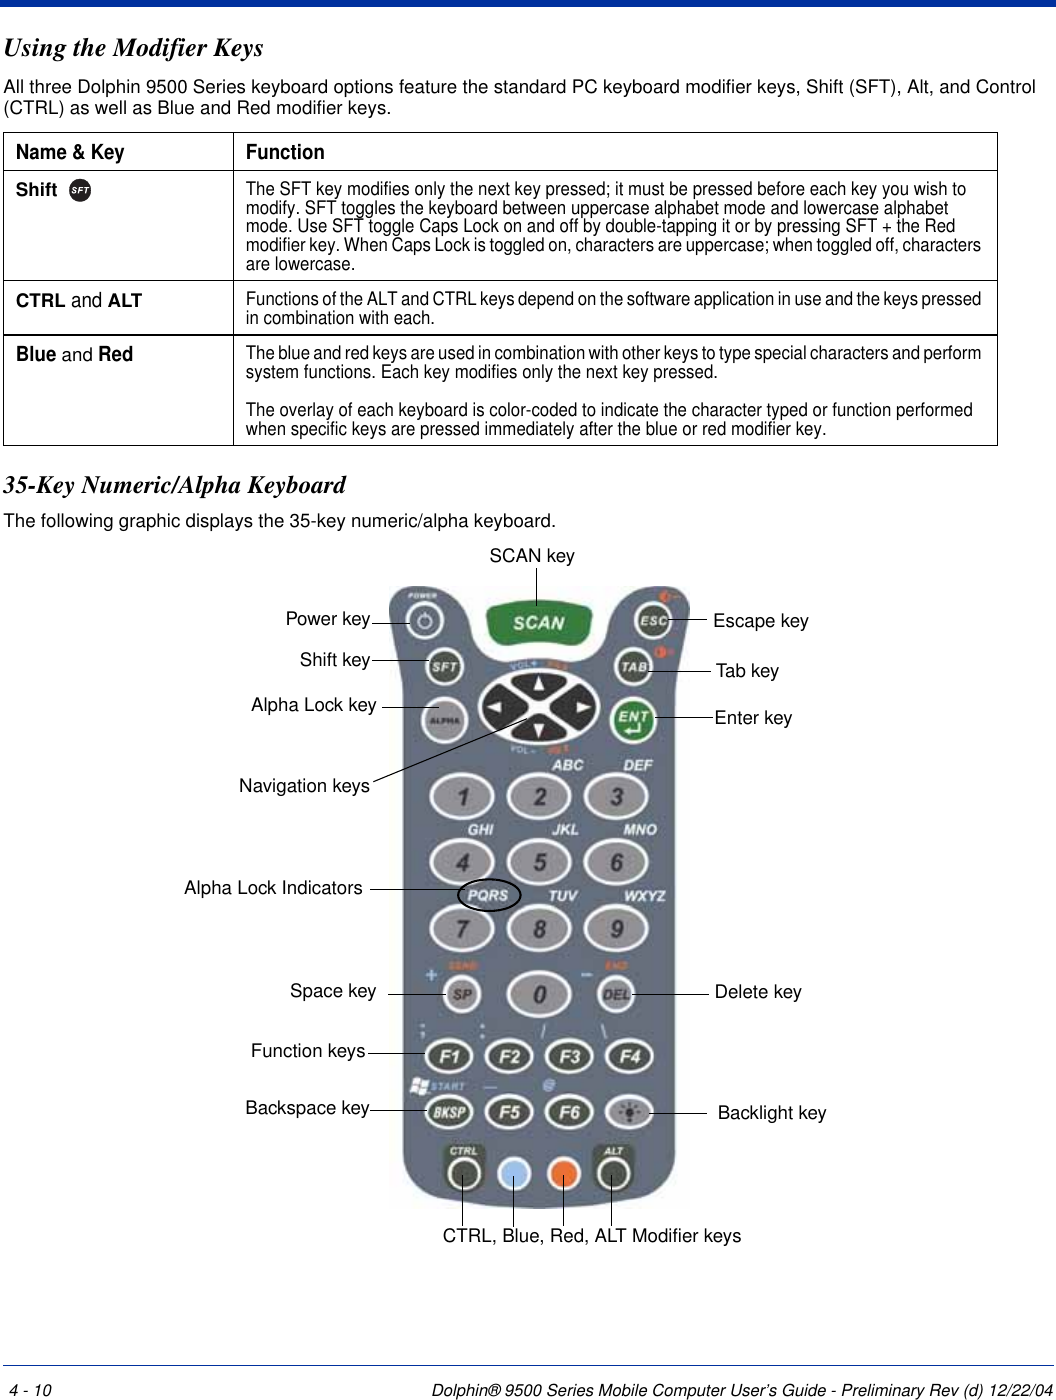 4 - 10 Dolphin® 9500 Series Mobile Computer User’s Guide - Preliminary Rev (d) 12/22/04Using the Modifier KeysAll three Dolphin 9500 Series keyboard options feature the standard PC keyboard modifier keys, Shift (SFT), Alt, and Control (CTRL) as well as Blue and Red modifier keys. 35-Key Numeric/Alpha KeyboardThe following graphic displays the 35-key numeric/alpha keyboard.Name &amp; Key FunctionShift   The SFT key modifies only the next key pressed; it must be pressed before each key you wish to modify. SFT toggles the keyboard between uppercase alphabet mode and lowercase alphabet mode. Use SFT toggle Caps Lock on and off by double-tapping it or by pressing SFT + the Red modifier key. When Caps Lock is toggled on, characters are uppercase; when toggled off, characters are lowercase. CTRL and ALTFunctions of the ALT and CTRL keys depend on the software application in use and the keys pressed in combination with each. Blue and Red The blue and red keys are used in combination with other keys to type special characters and perform system functions. Each key modifies only the next key pressed.The overlay of each keyboard is color-coded to indicate the character typed or function performed when specific keys are pressed immediately after the blue or red modifier key. Enter keyBacklight keyAlpha Lock keyShift keyNavigation keysTab keyCTRL, Blue, Red, ALT Modifier keysSCAN keyPower keyBackspace keyFunction keysSpace keyEscape keyDelete keyAlpha Lock Indicators